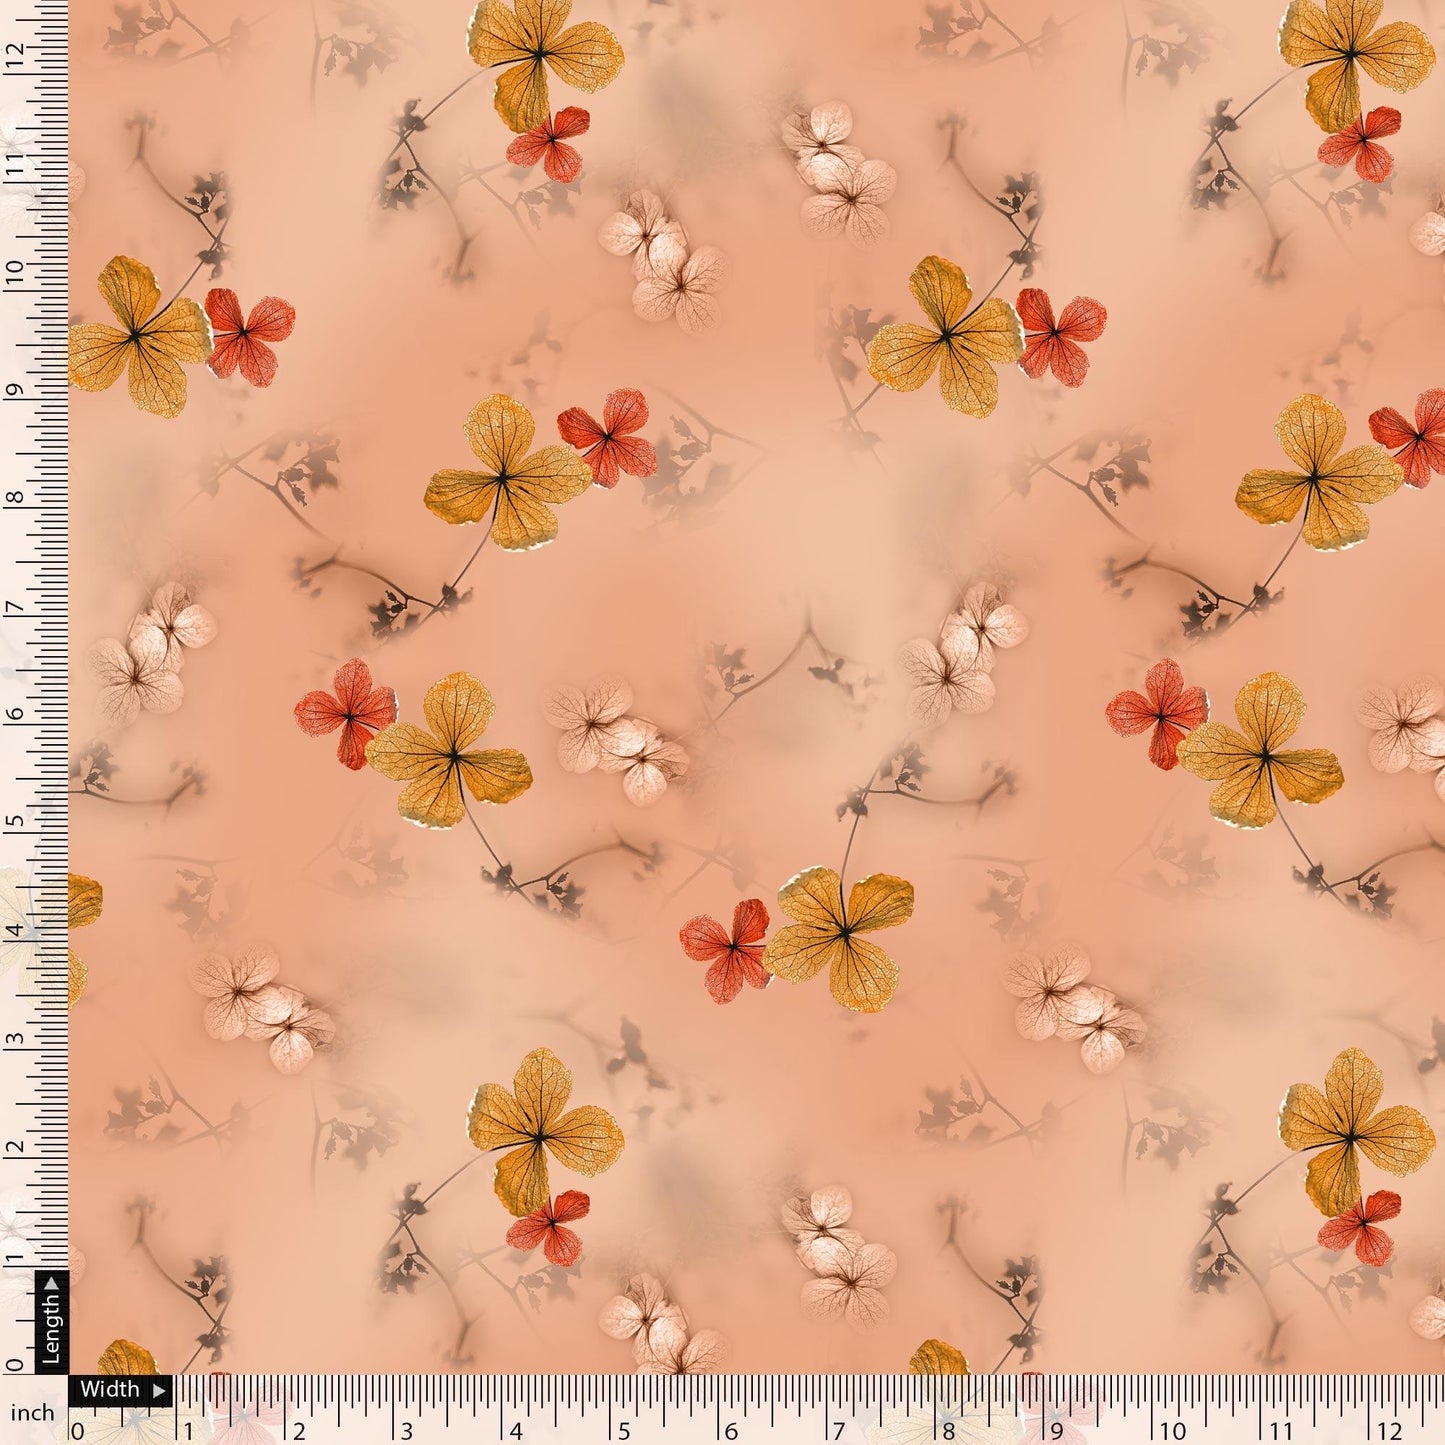 Repeat Red And Golden Periwinkle Digital Printed Fabric - Pure Georgette - FAB VOGUE Studio®